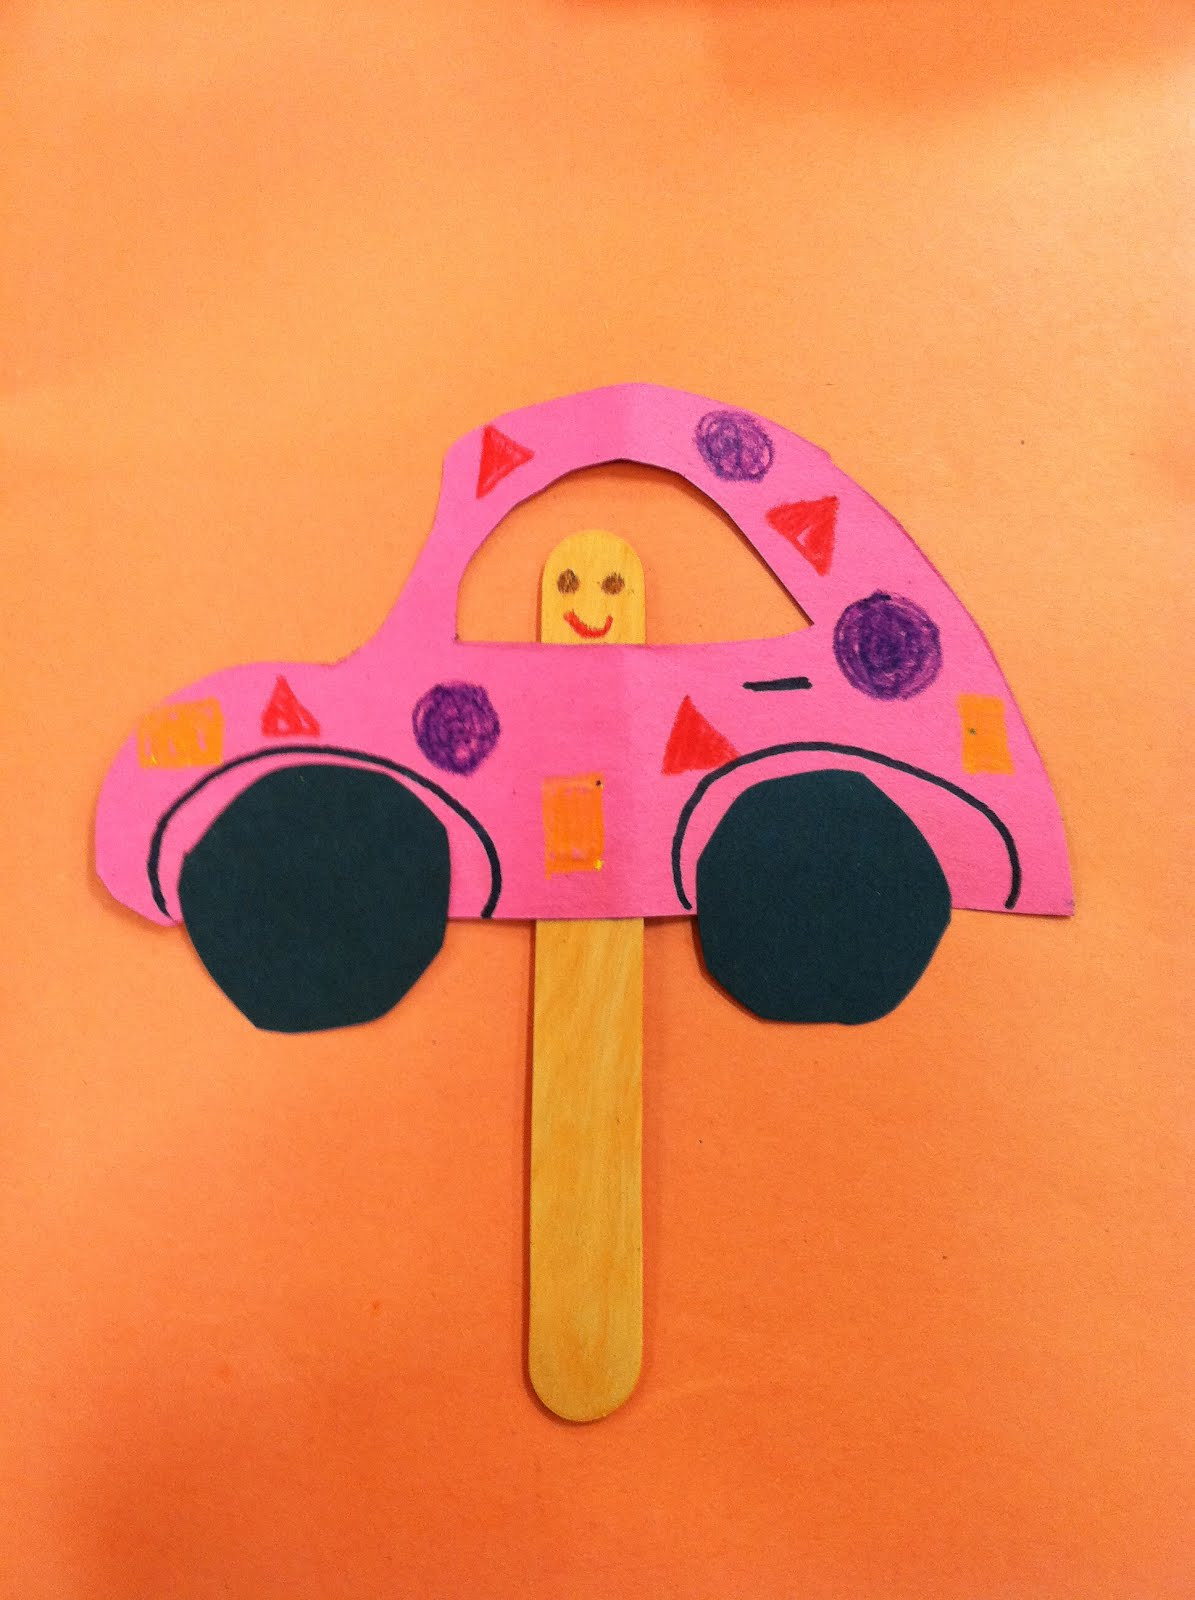 Preschool Arts And Crafts Ideas
 In the Children s Room Theme Thursday Cars Cars Cars